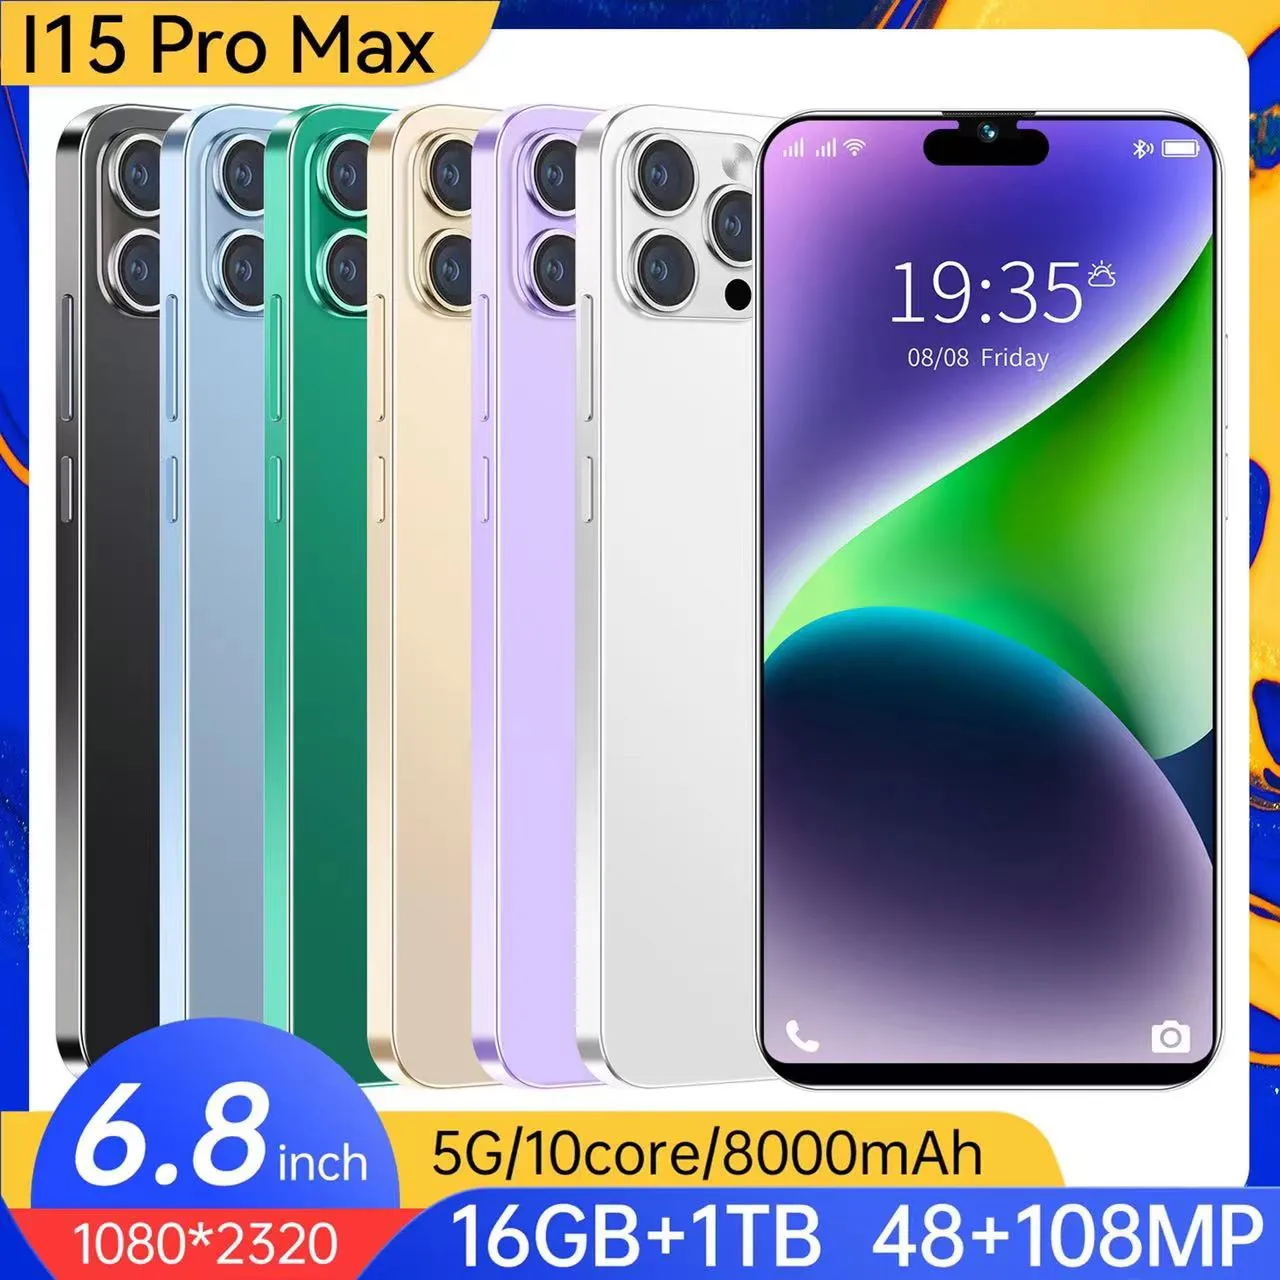 Meiyu Brand New I15 Pro Max Cell Phones 7.3インチスマートフォン4G LTE 5Gスマートフォン16GB RAM 1TBカメラ48MP 108MP FACE ID GPS OCTA CORE ANDROID MOBILE